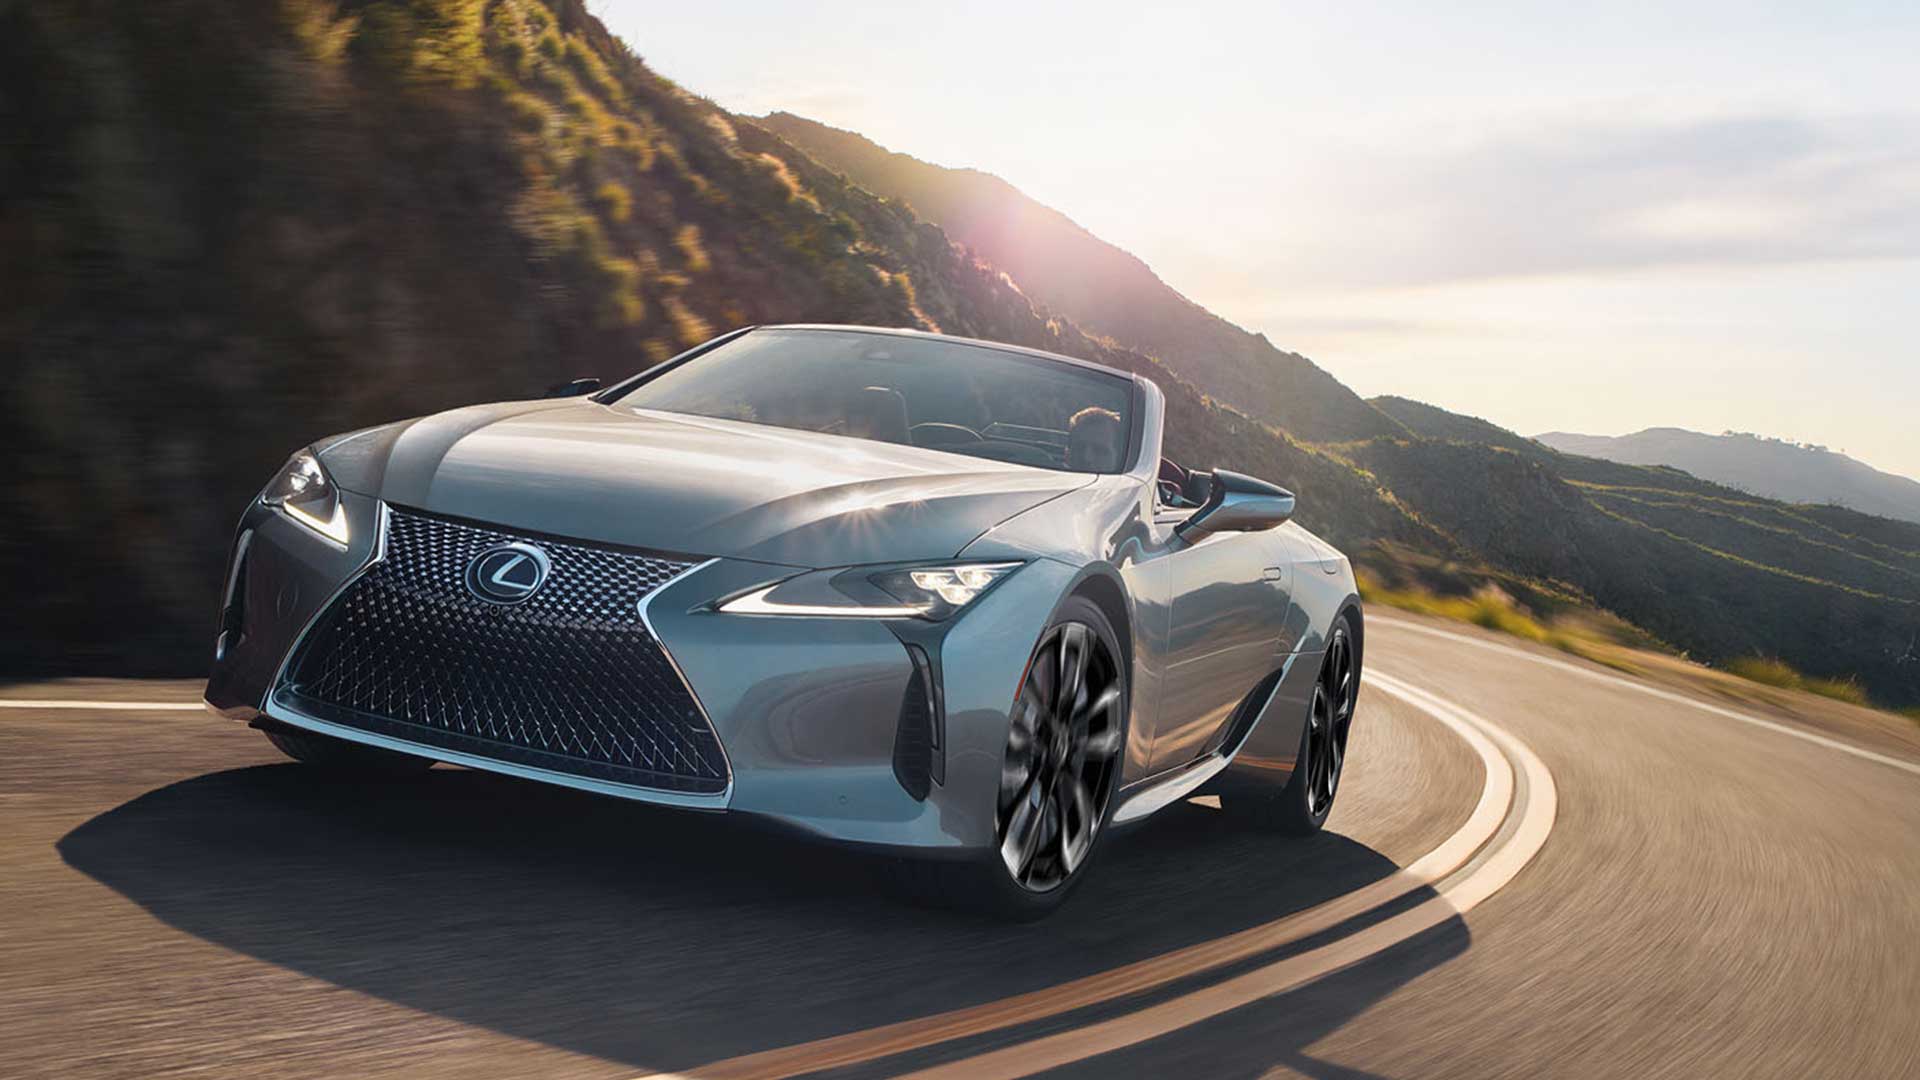 A white LC 500 Convertible drives up a curving mountain road.